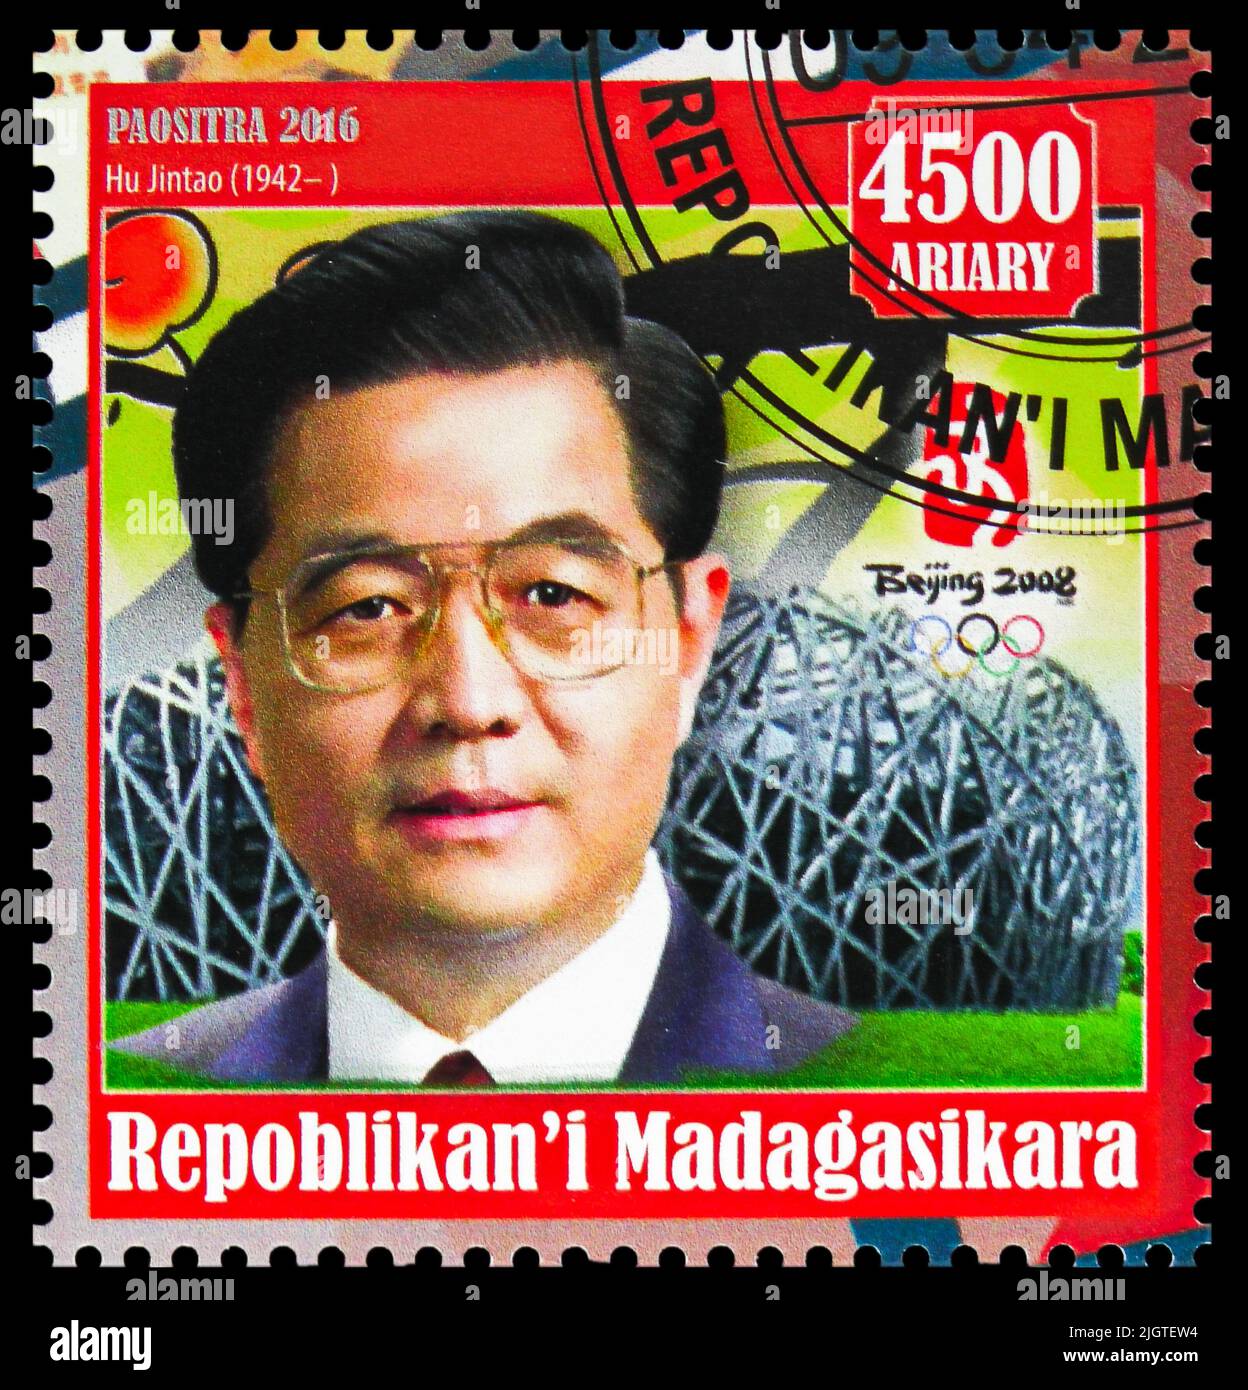 MOSCOW, RUSSIA - JUNE 17, 2022: Postage stamp printed in Madagascar shows Hu Jntao, Leaders of Republic of China serie, circa 2016 Stock Photo